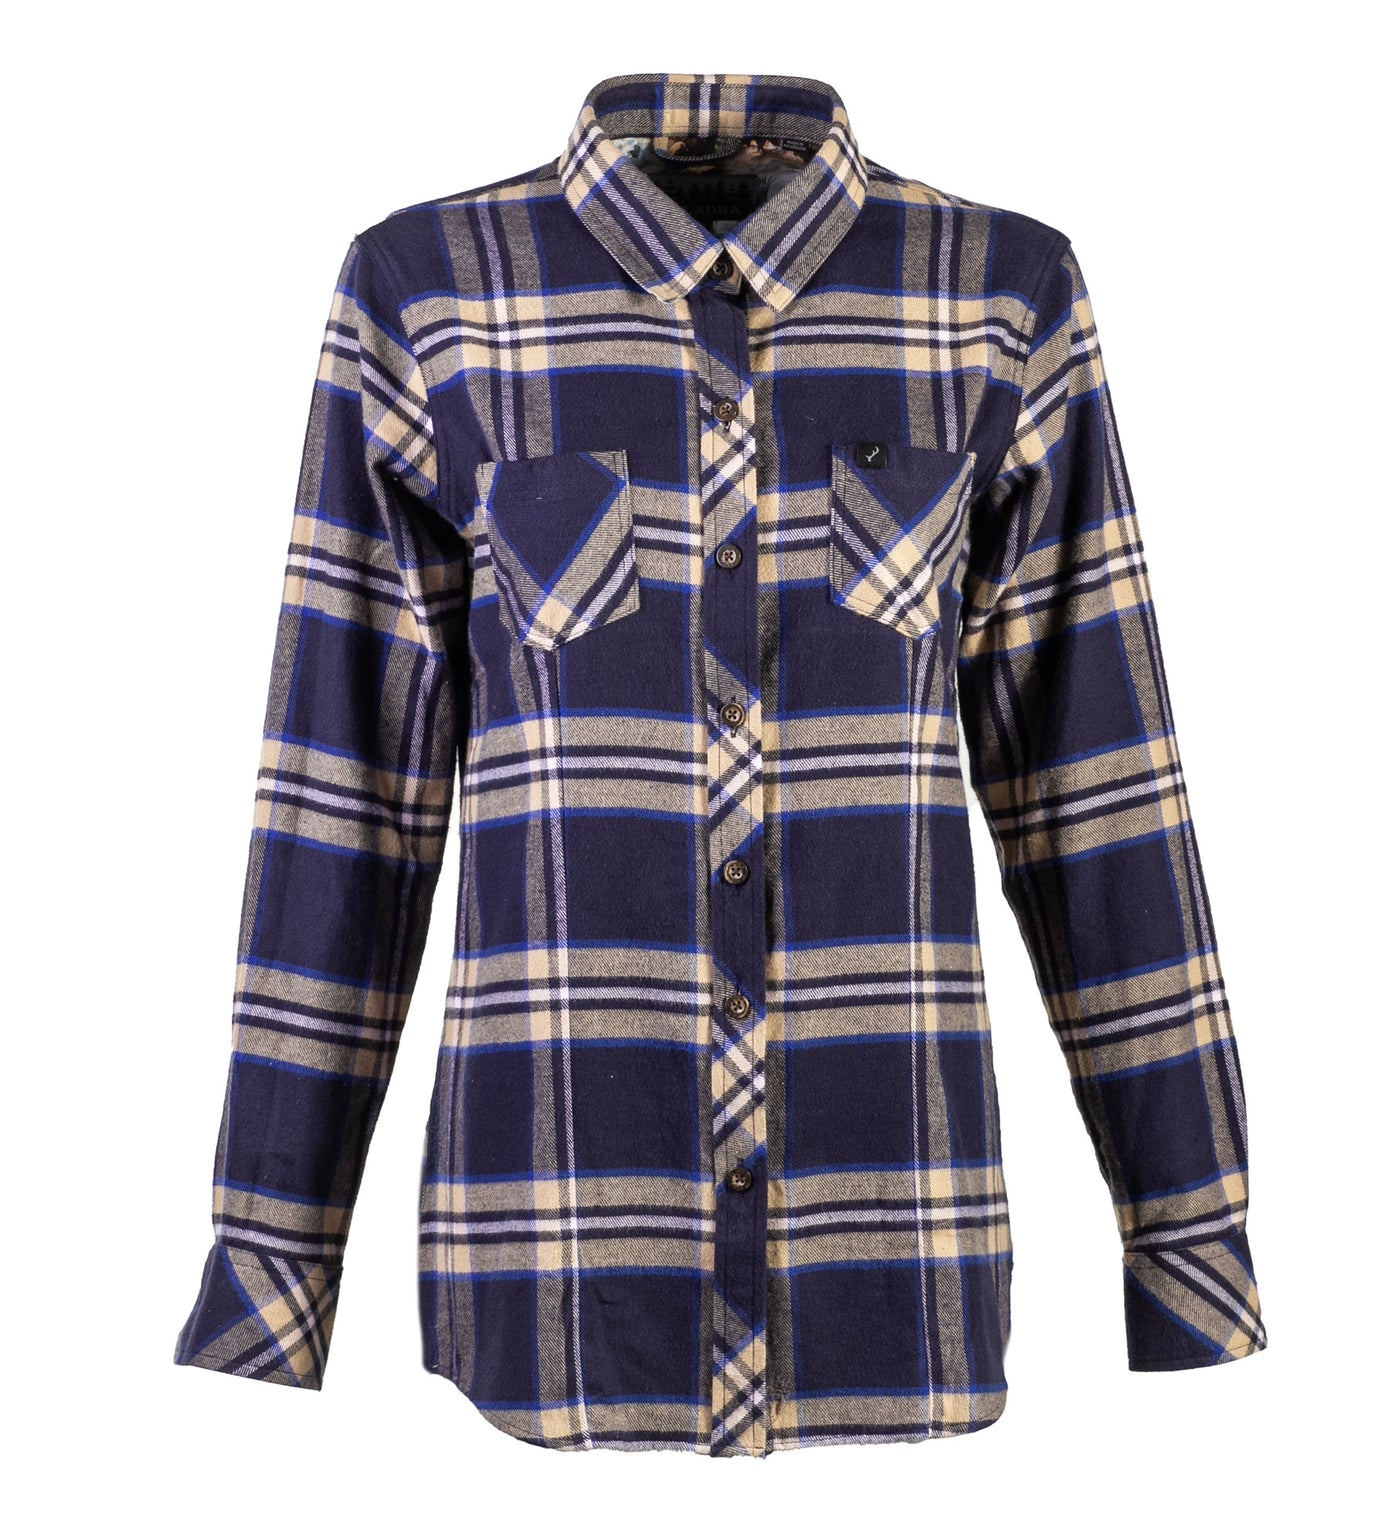 Women's Every Day Flannel Shirt- Slate Blue